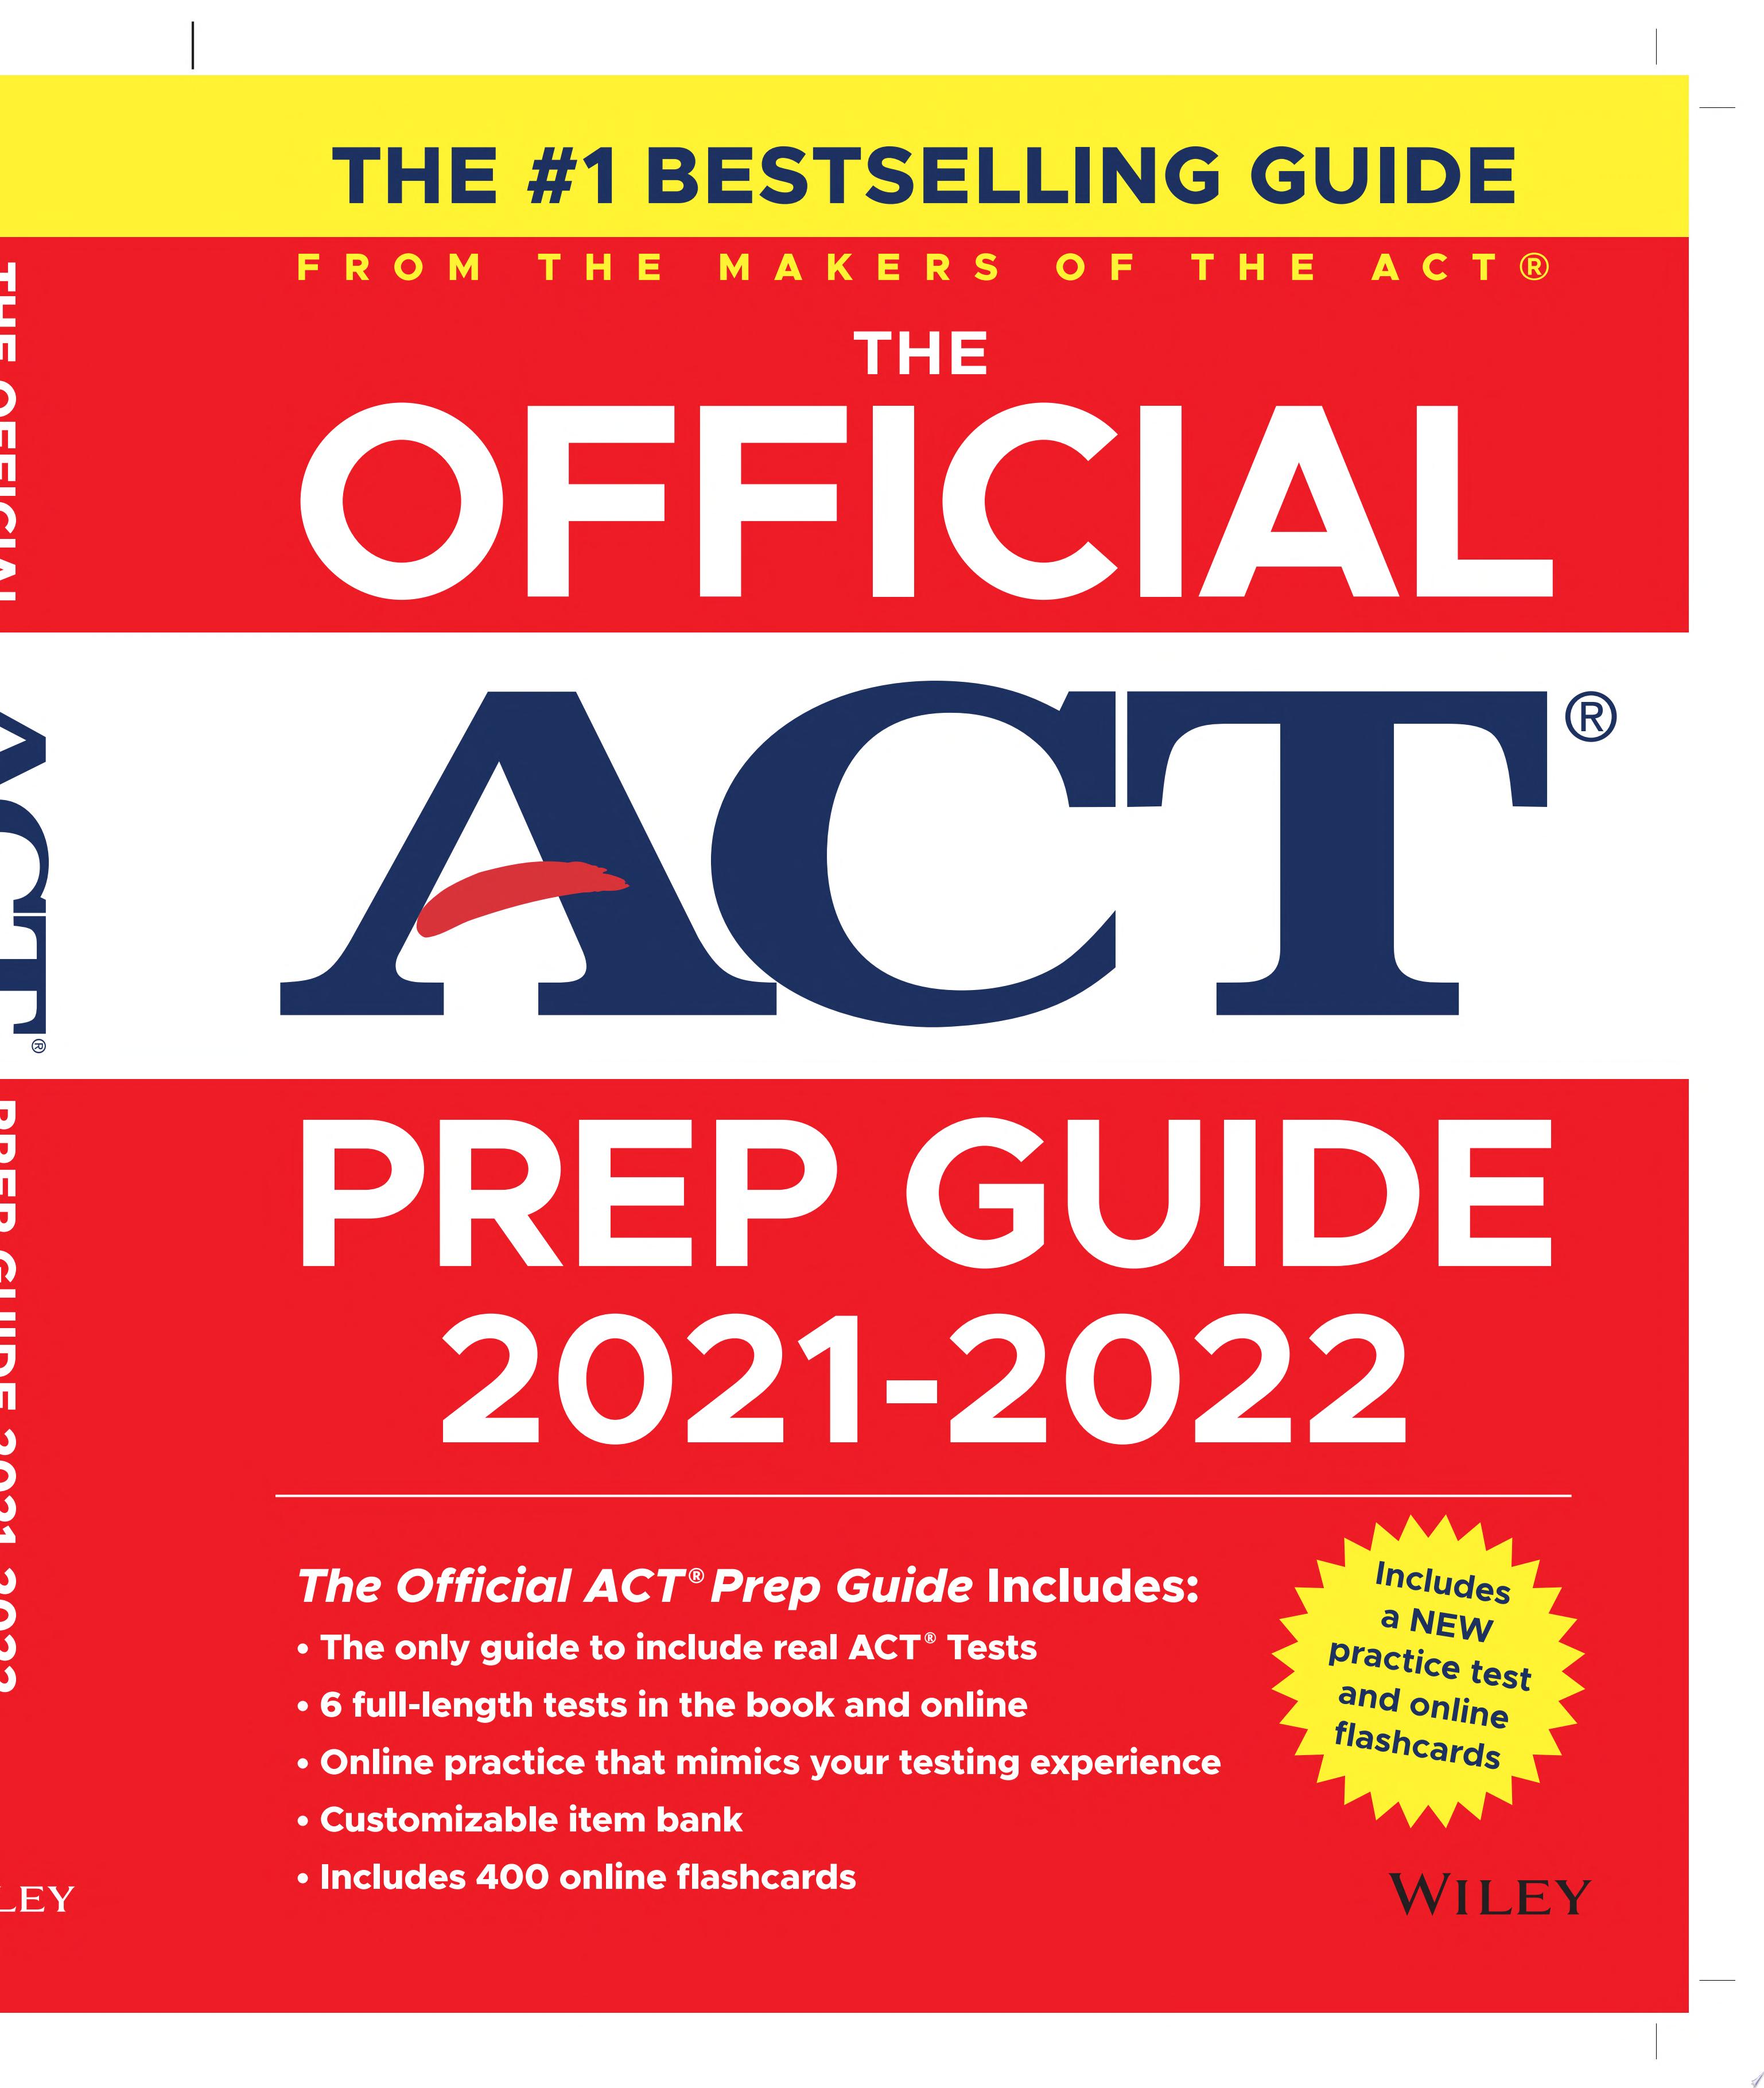 Image for "The Official ACT Prep Guide 2021-2022, (Book + 6 Practice Tests + Bonus Online Content)"